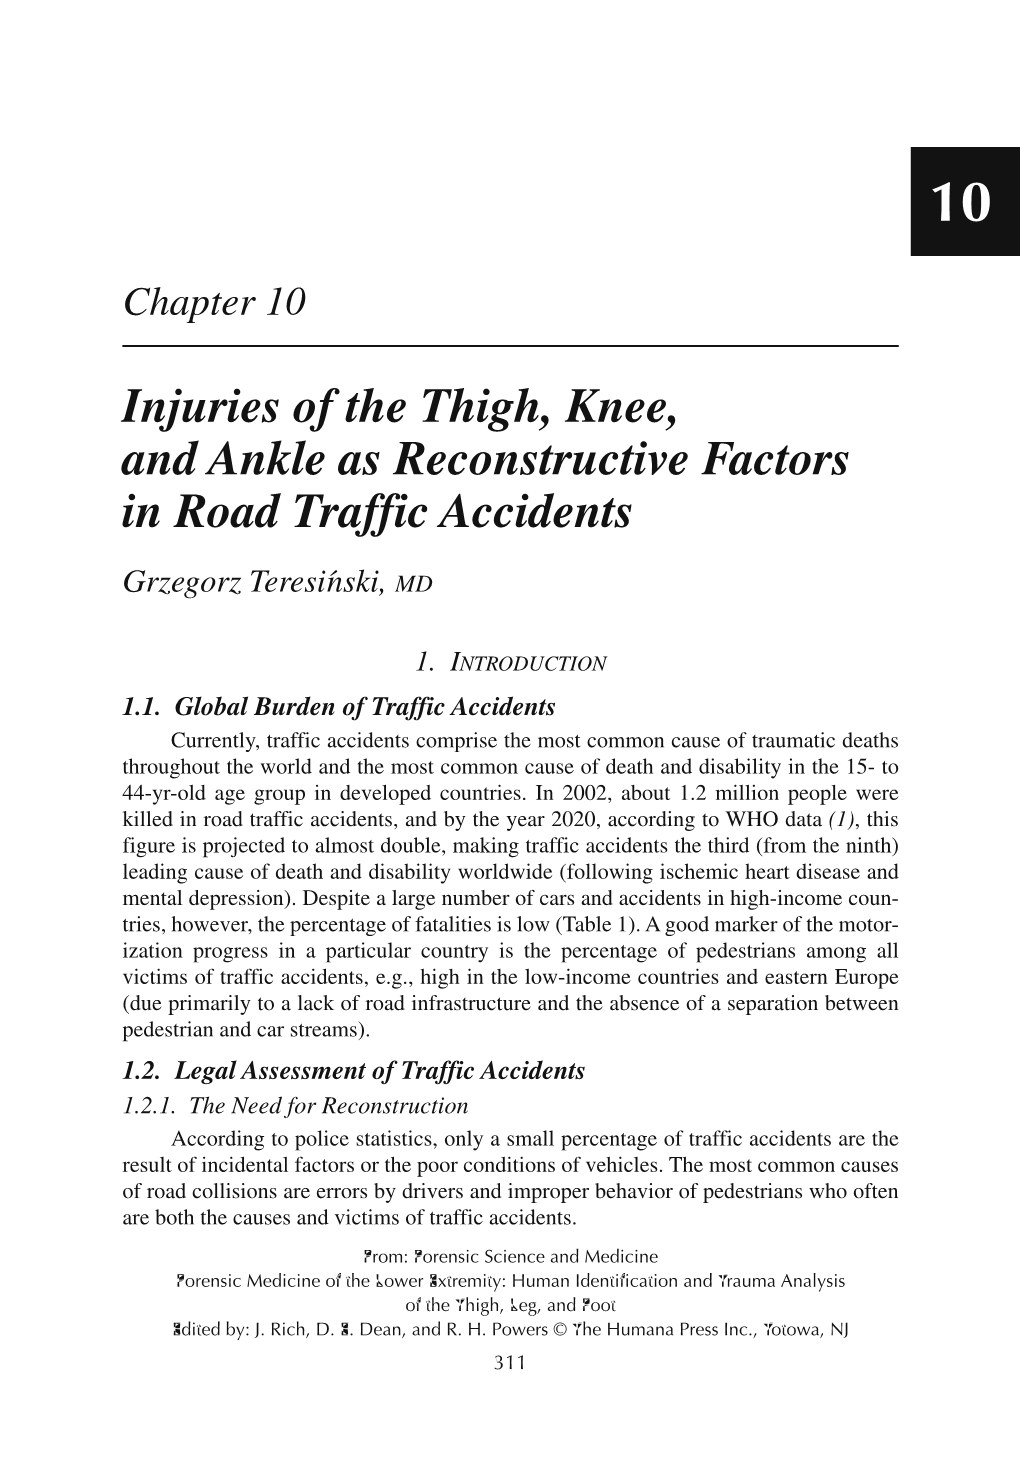 Injuries of the Thigh, Knee, and Ankle As Reconstructive Factors in Road Traffic Accidents